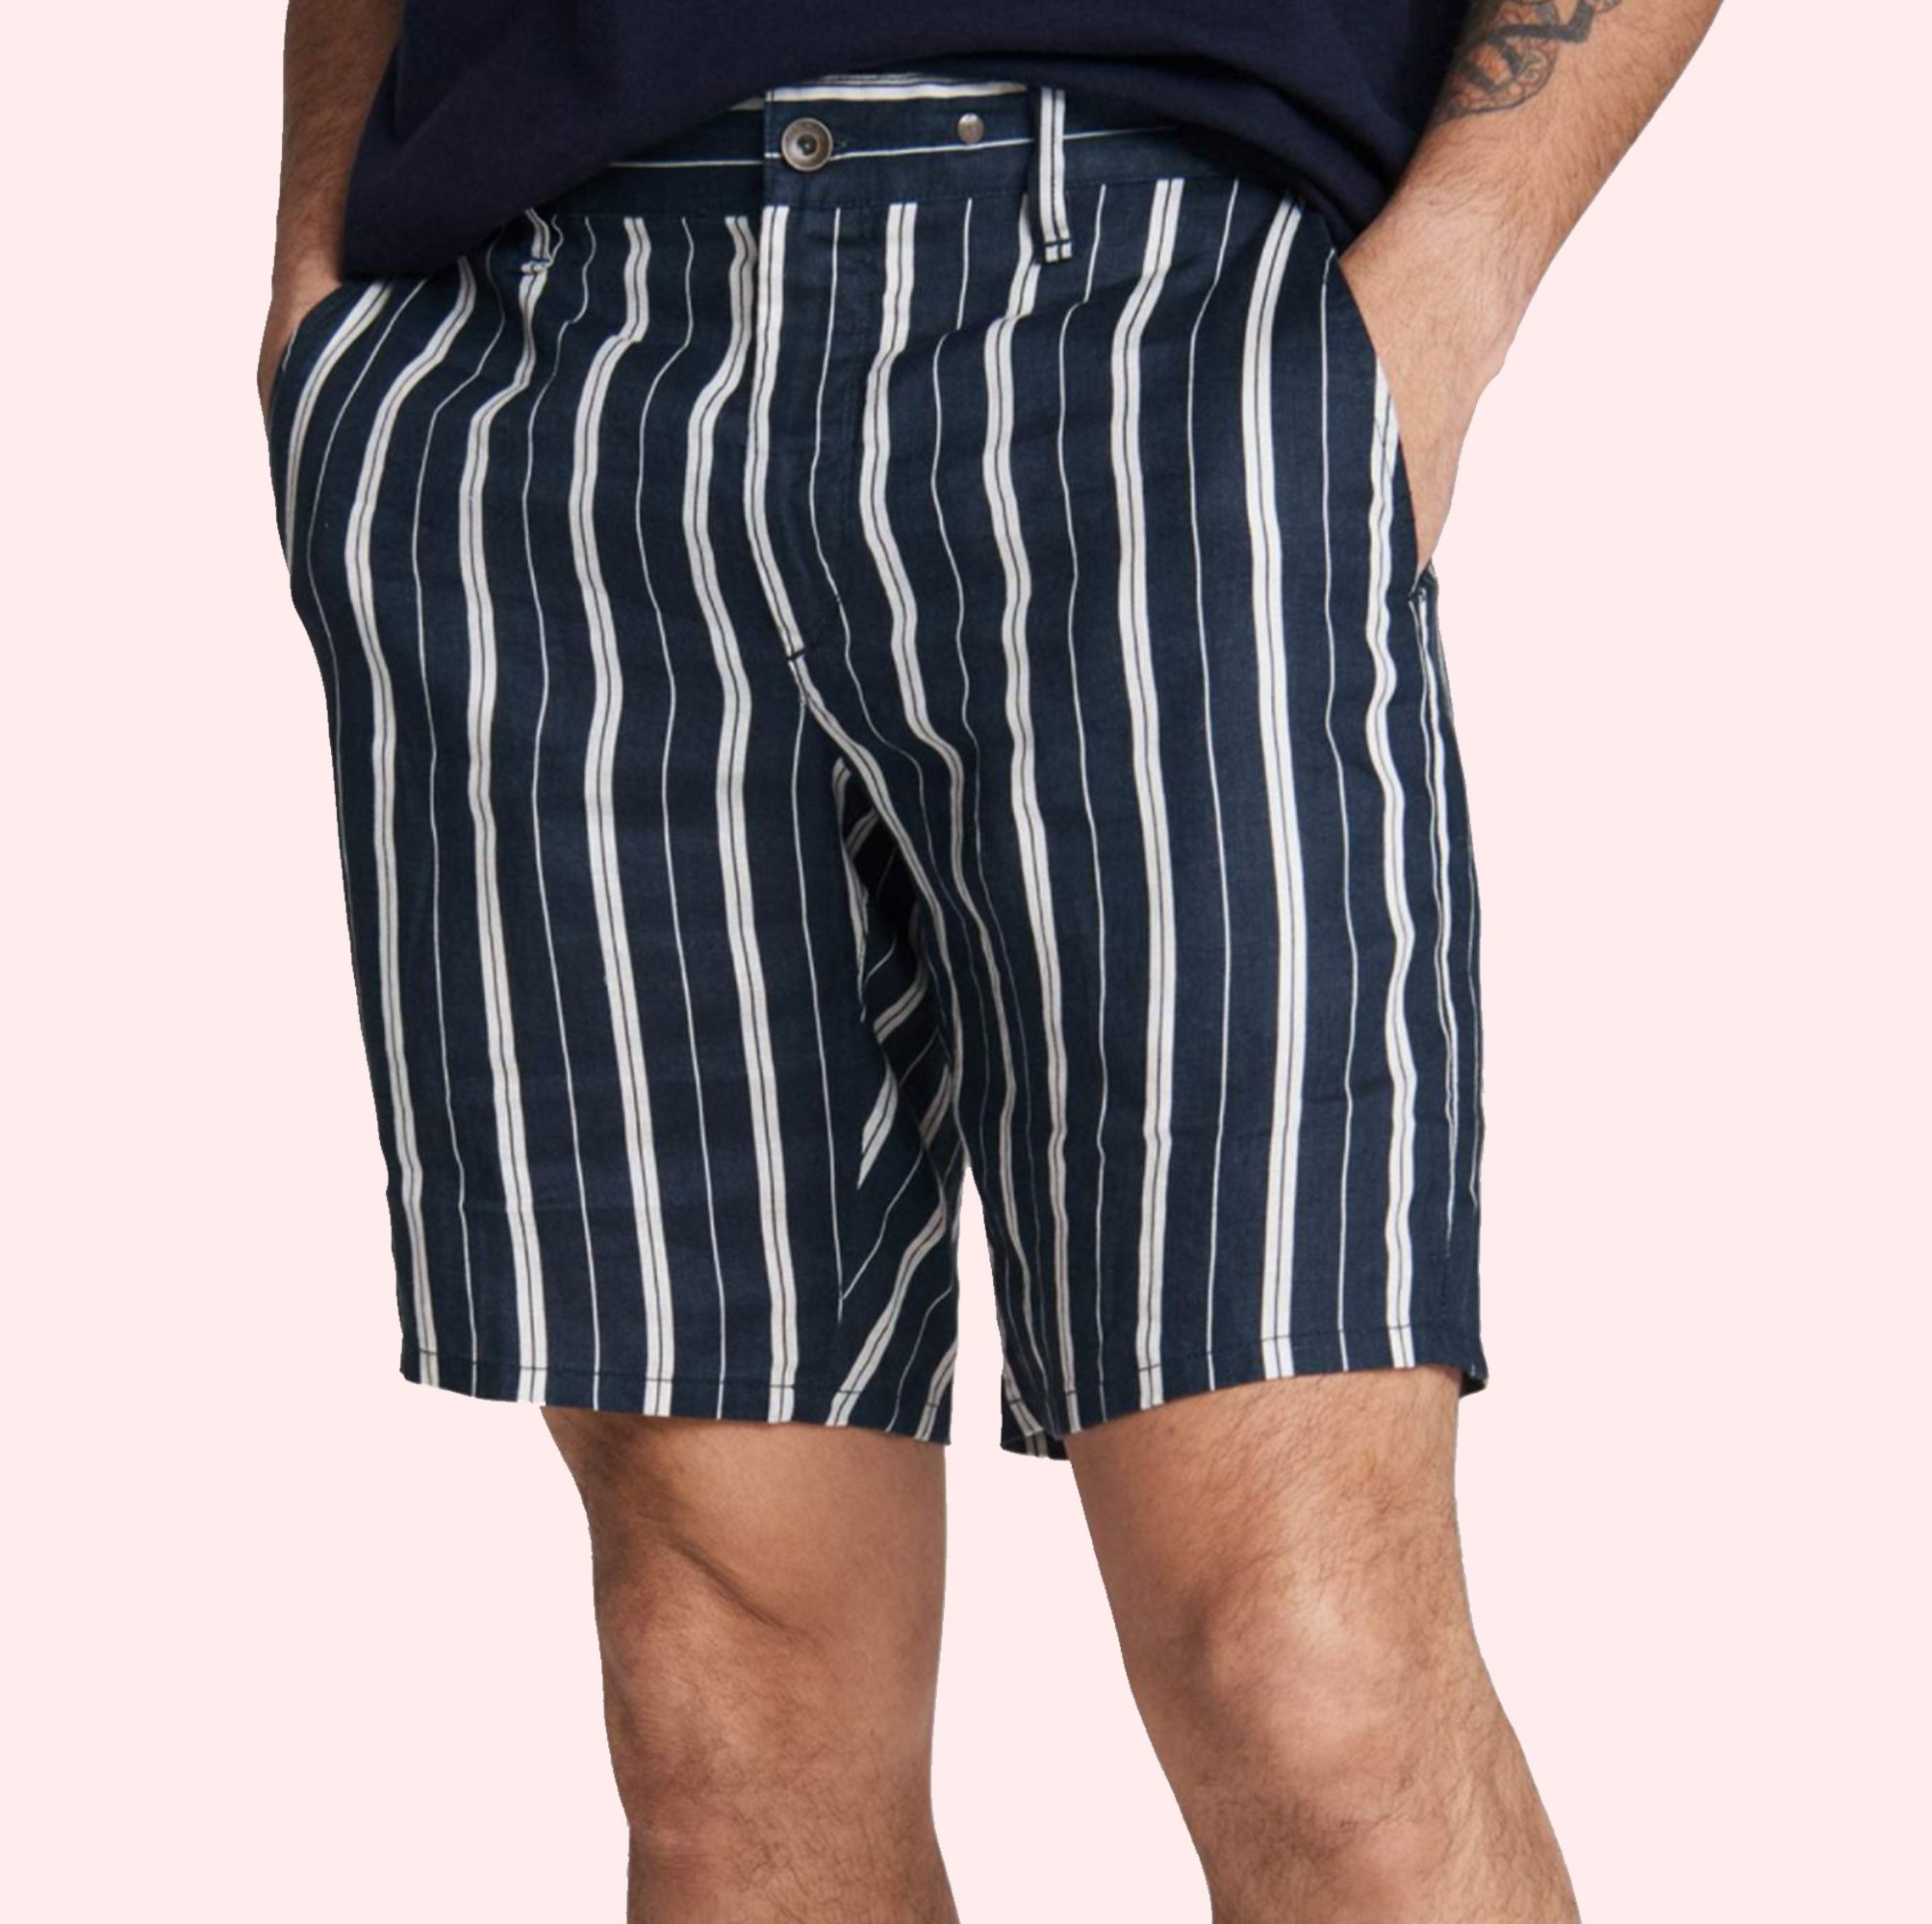 30 Pairs of Shorts to Keep You Cool All Summer Long